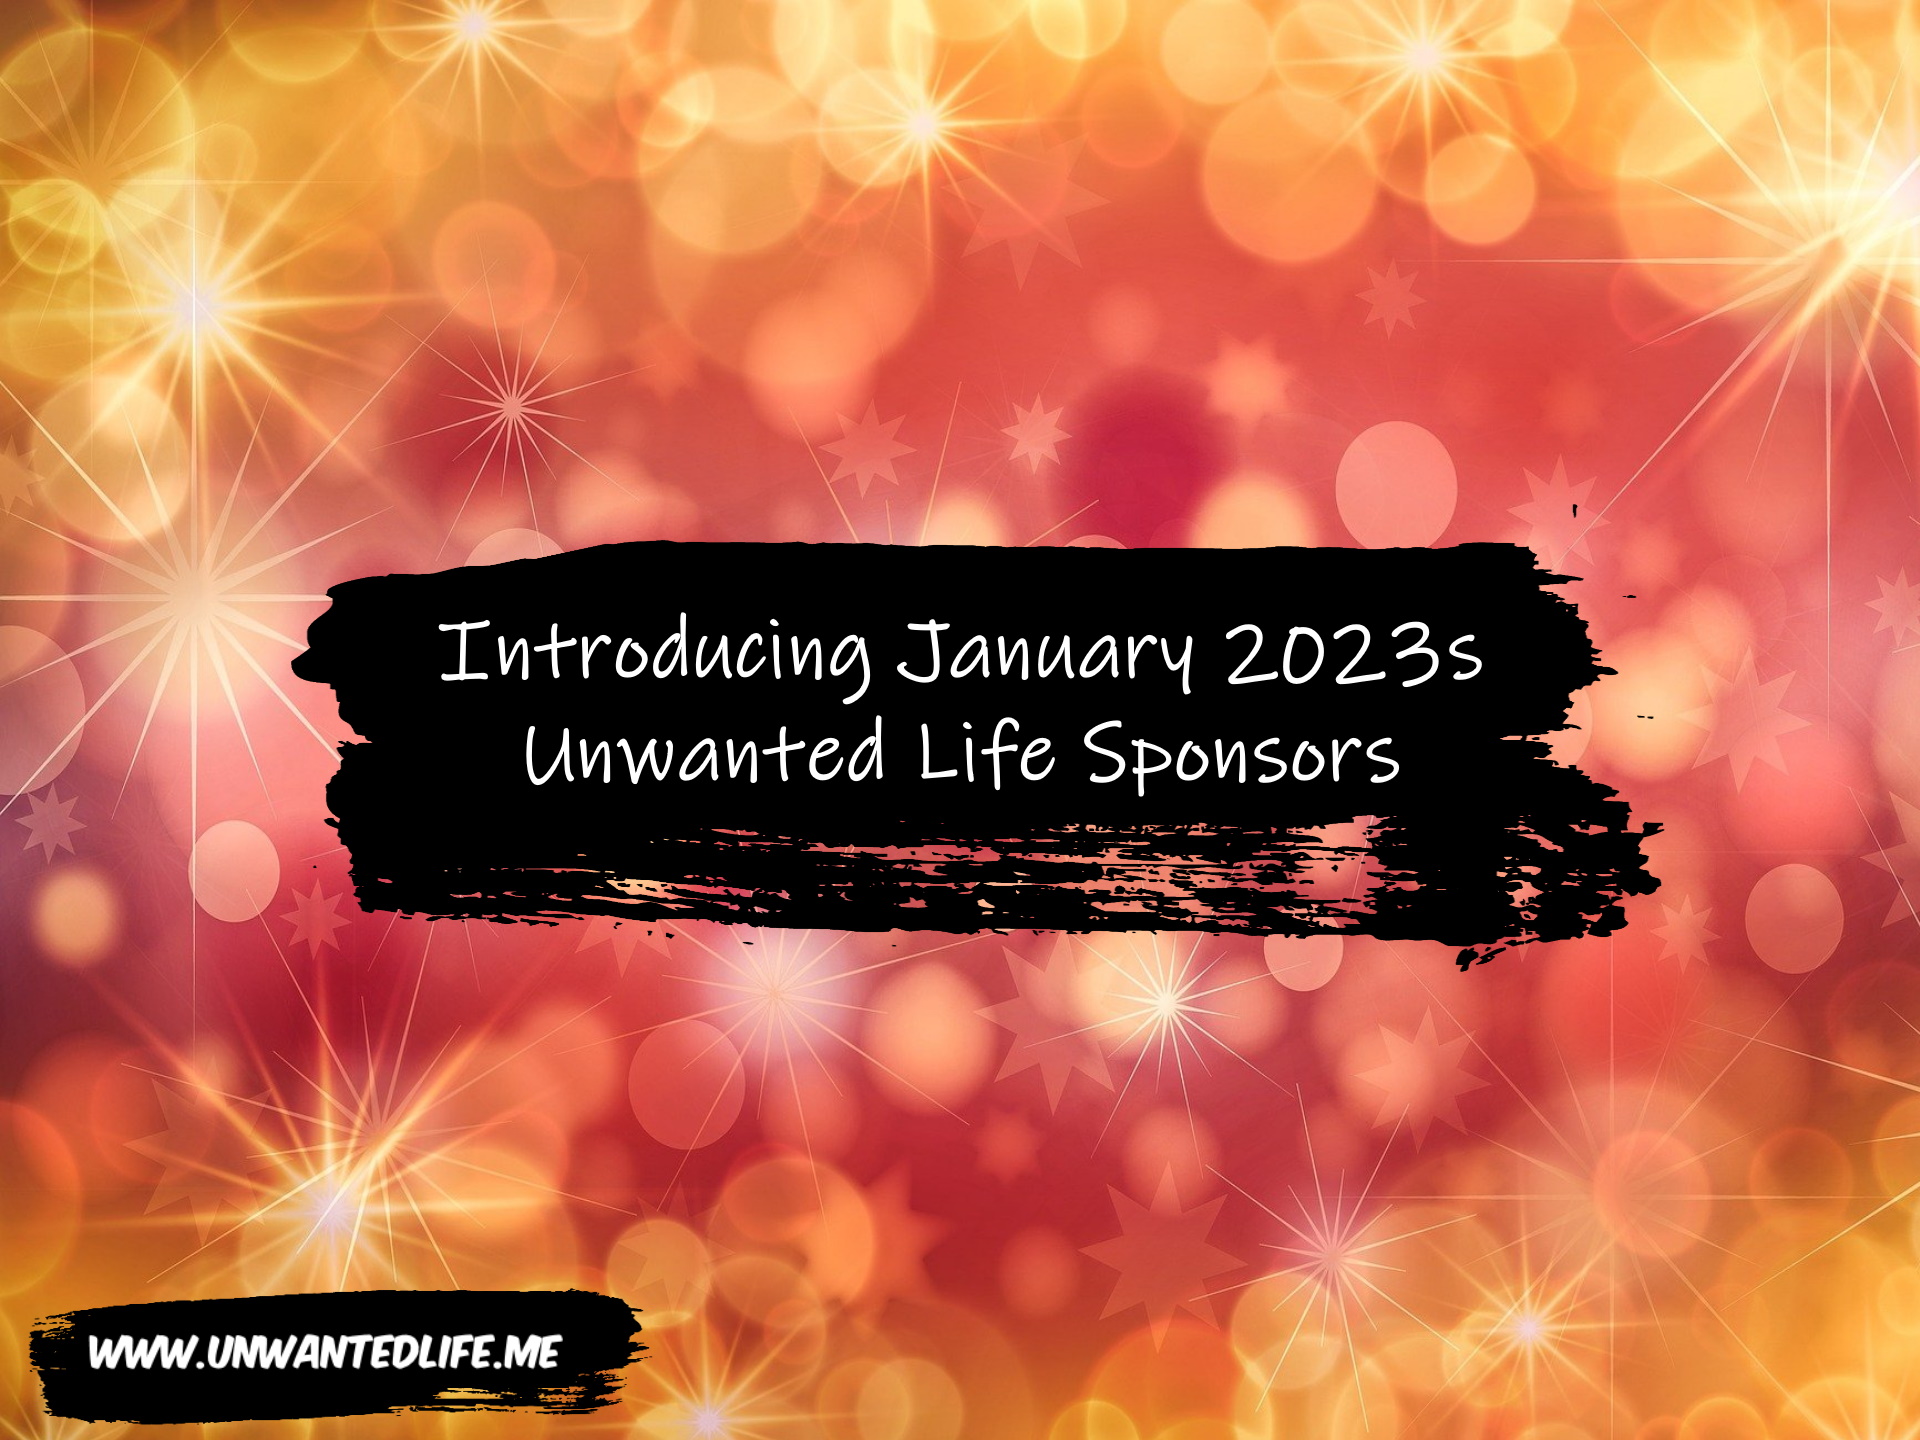 An image of a bright and sparkly image to signify the New Year, to represent the topic of the article -Introducing January 2023s Unwanted Life Sponsors